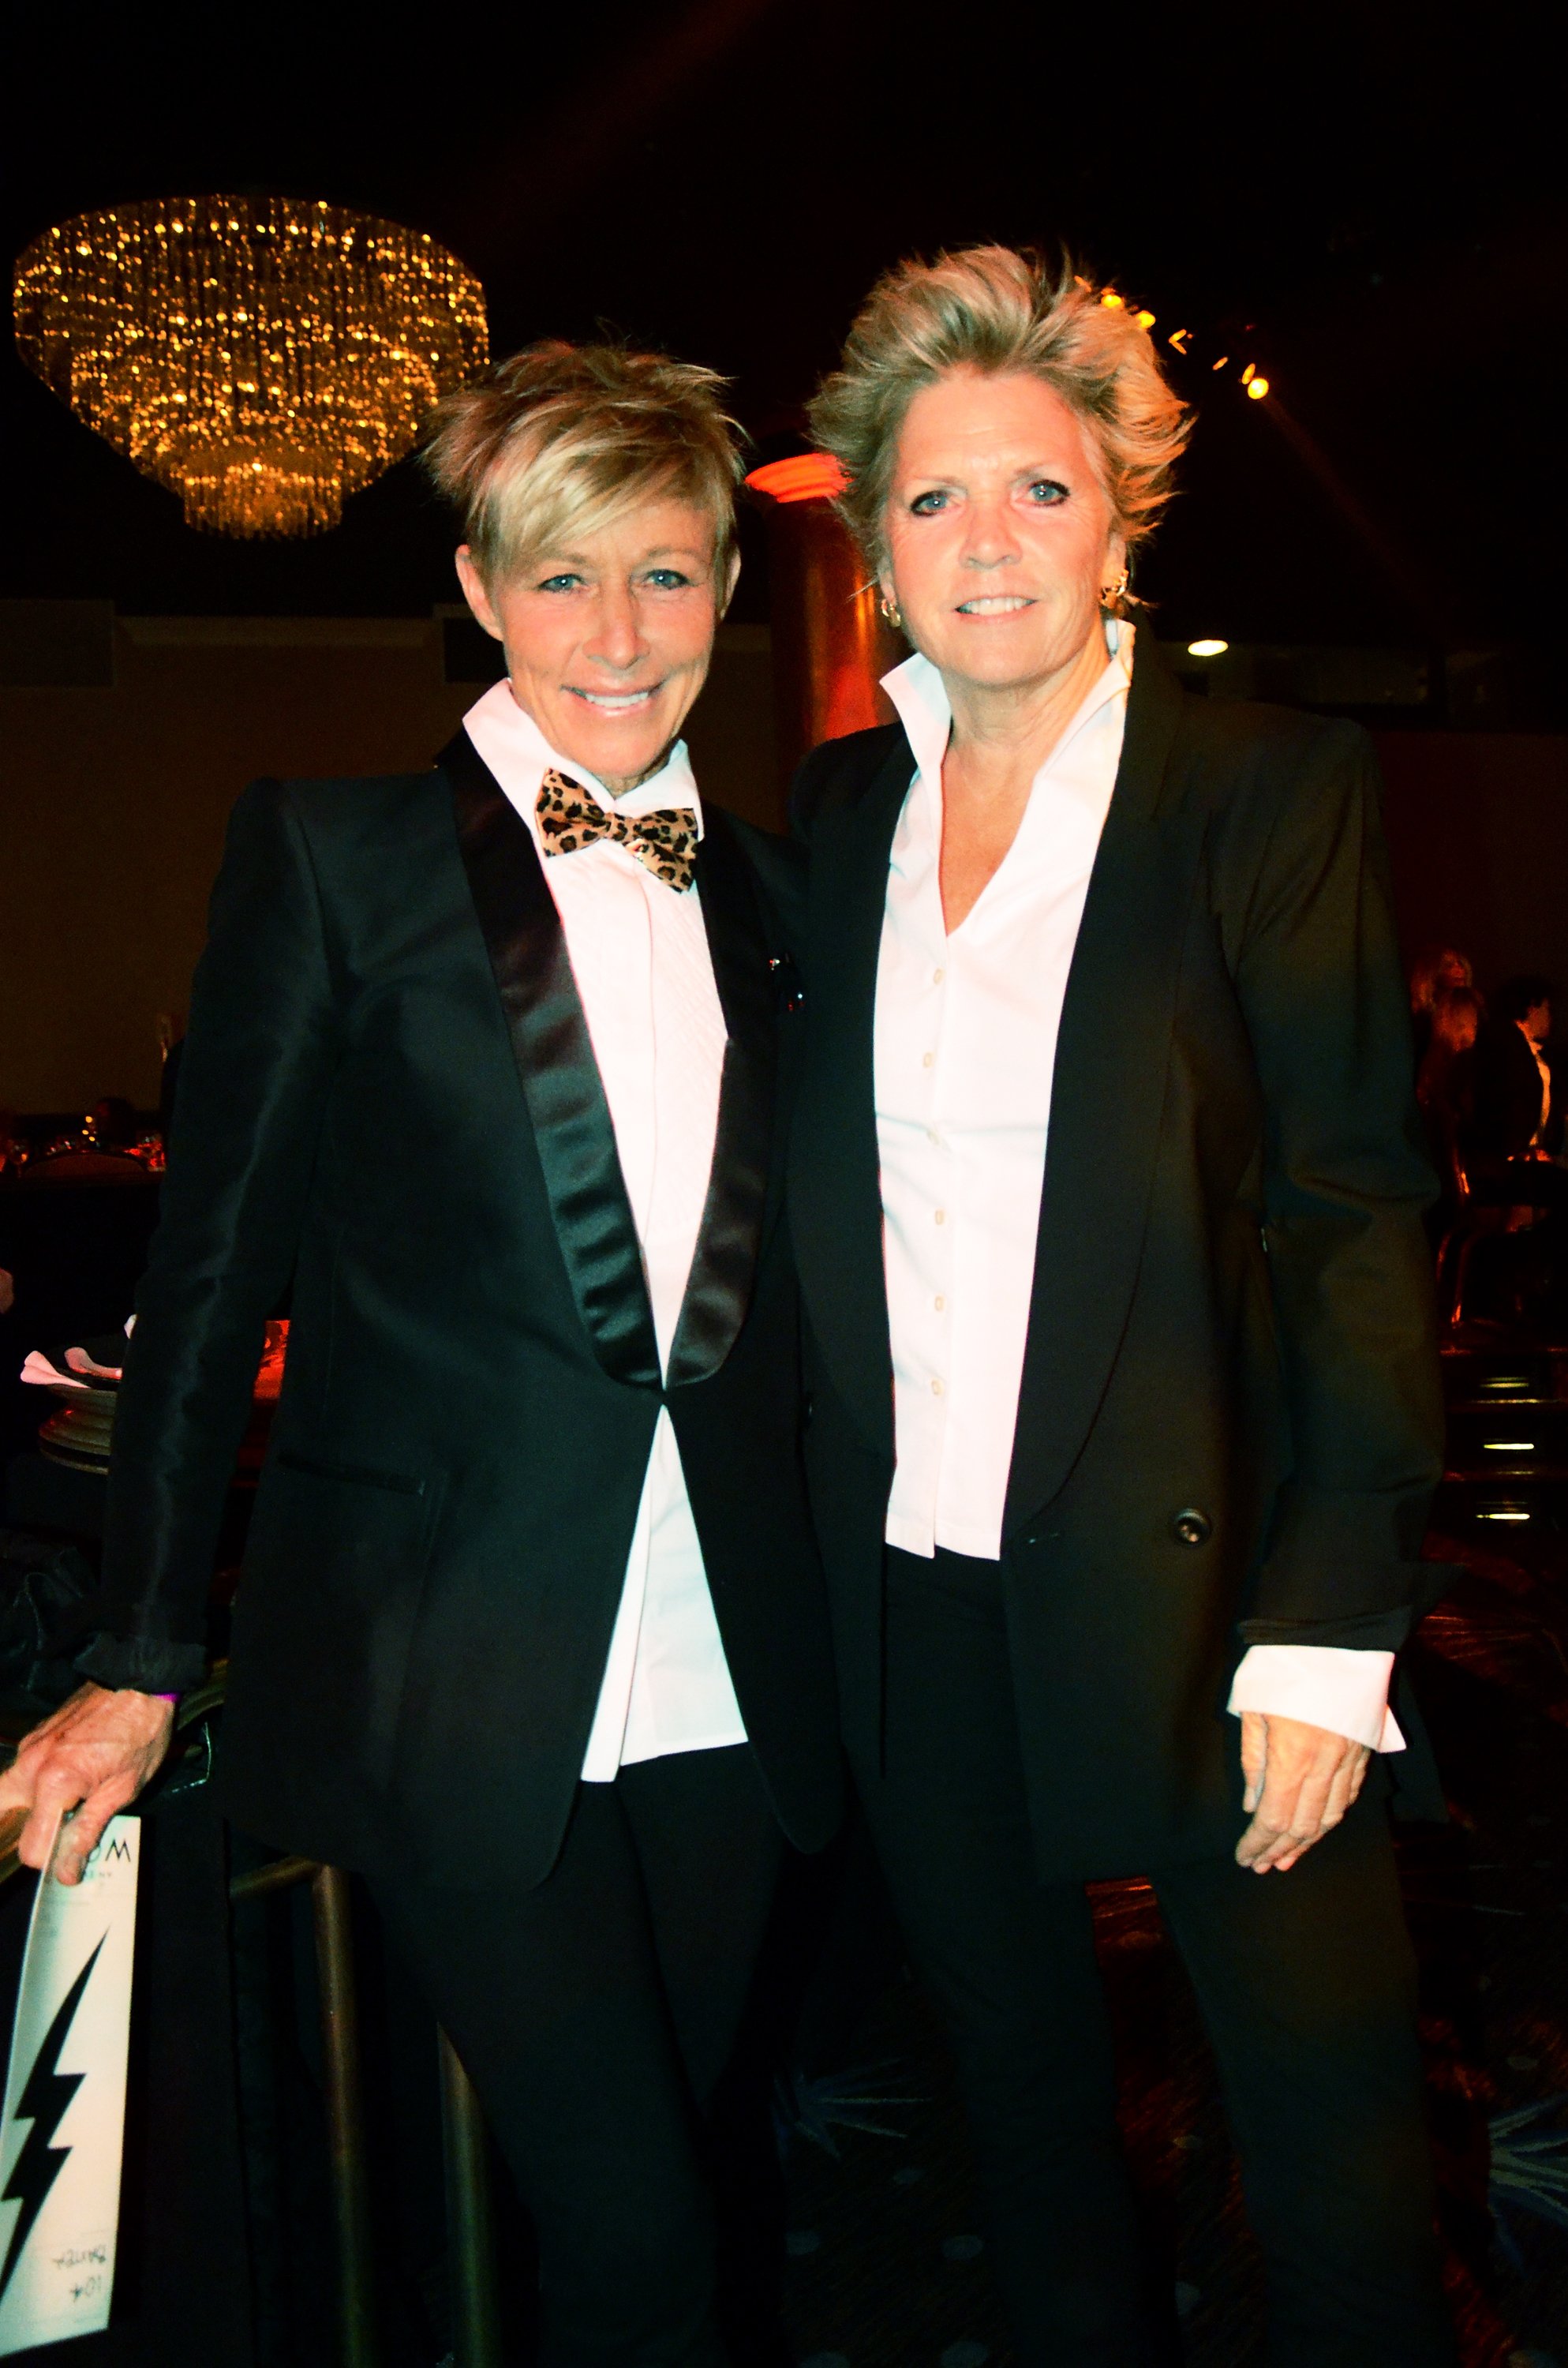 Meredith Baxter and partner Nancy Locke at the LA Gay & Lesbian Center's 2013 "An Evening with Women" gala in Beverly Hills, California | Source: Getty Images